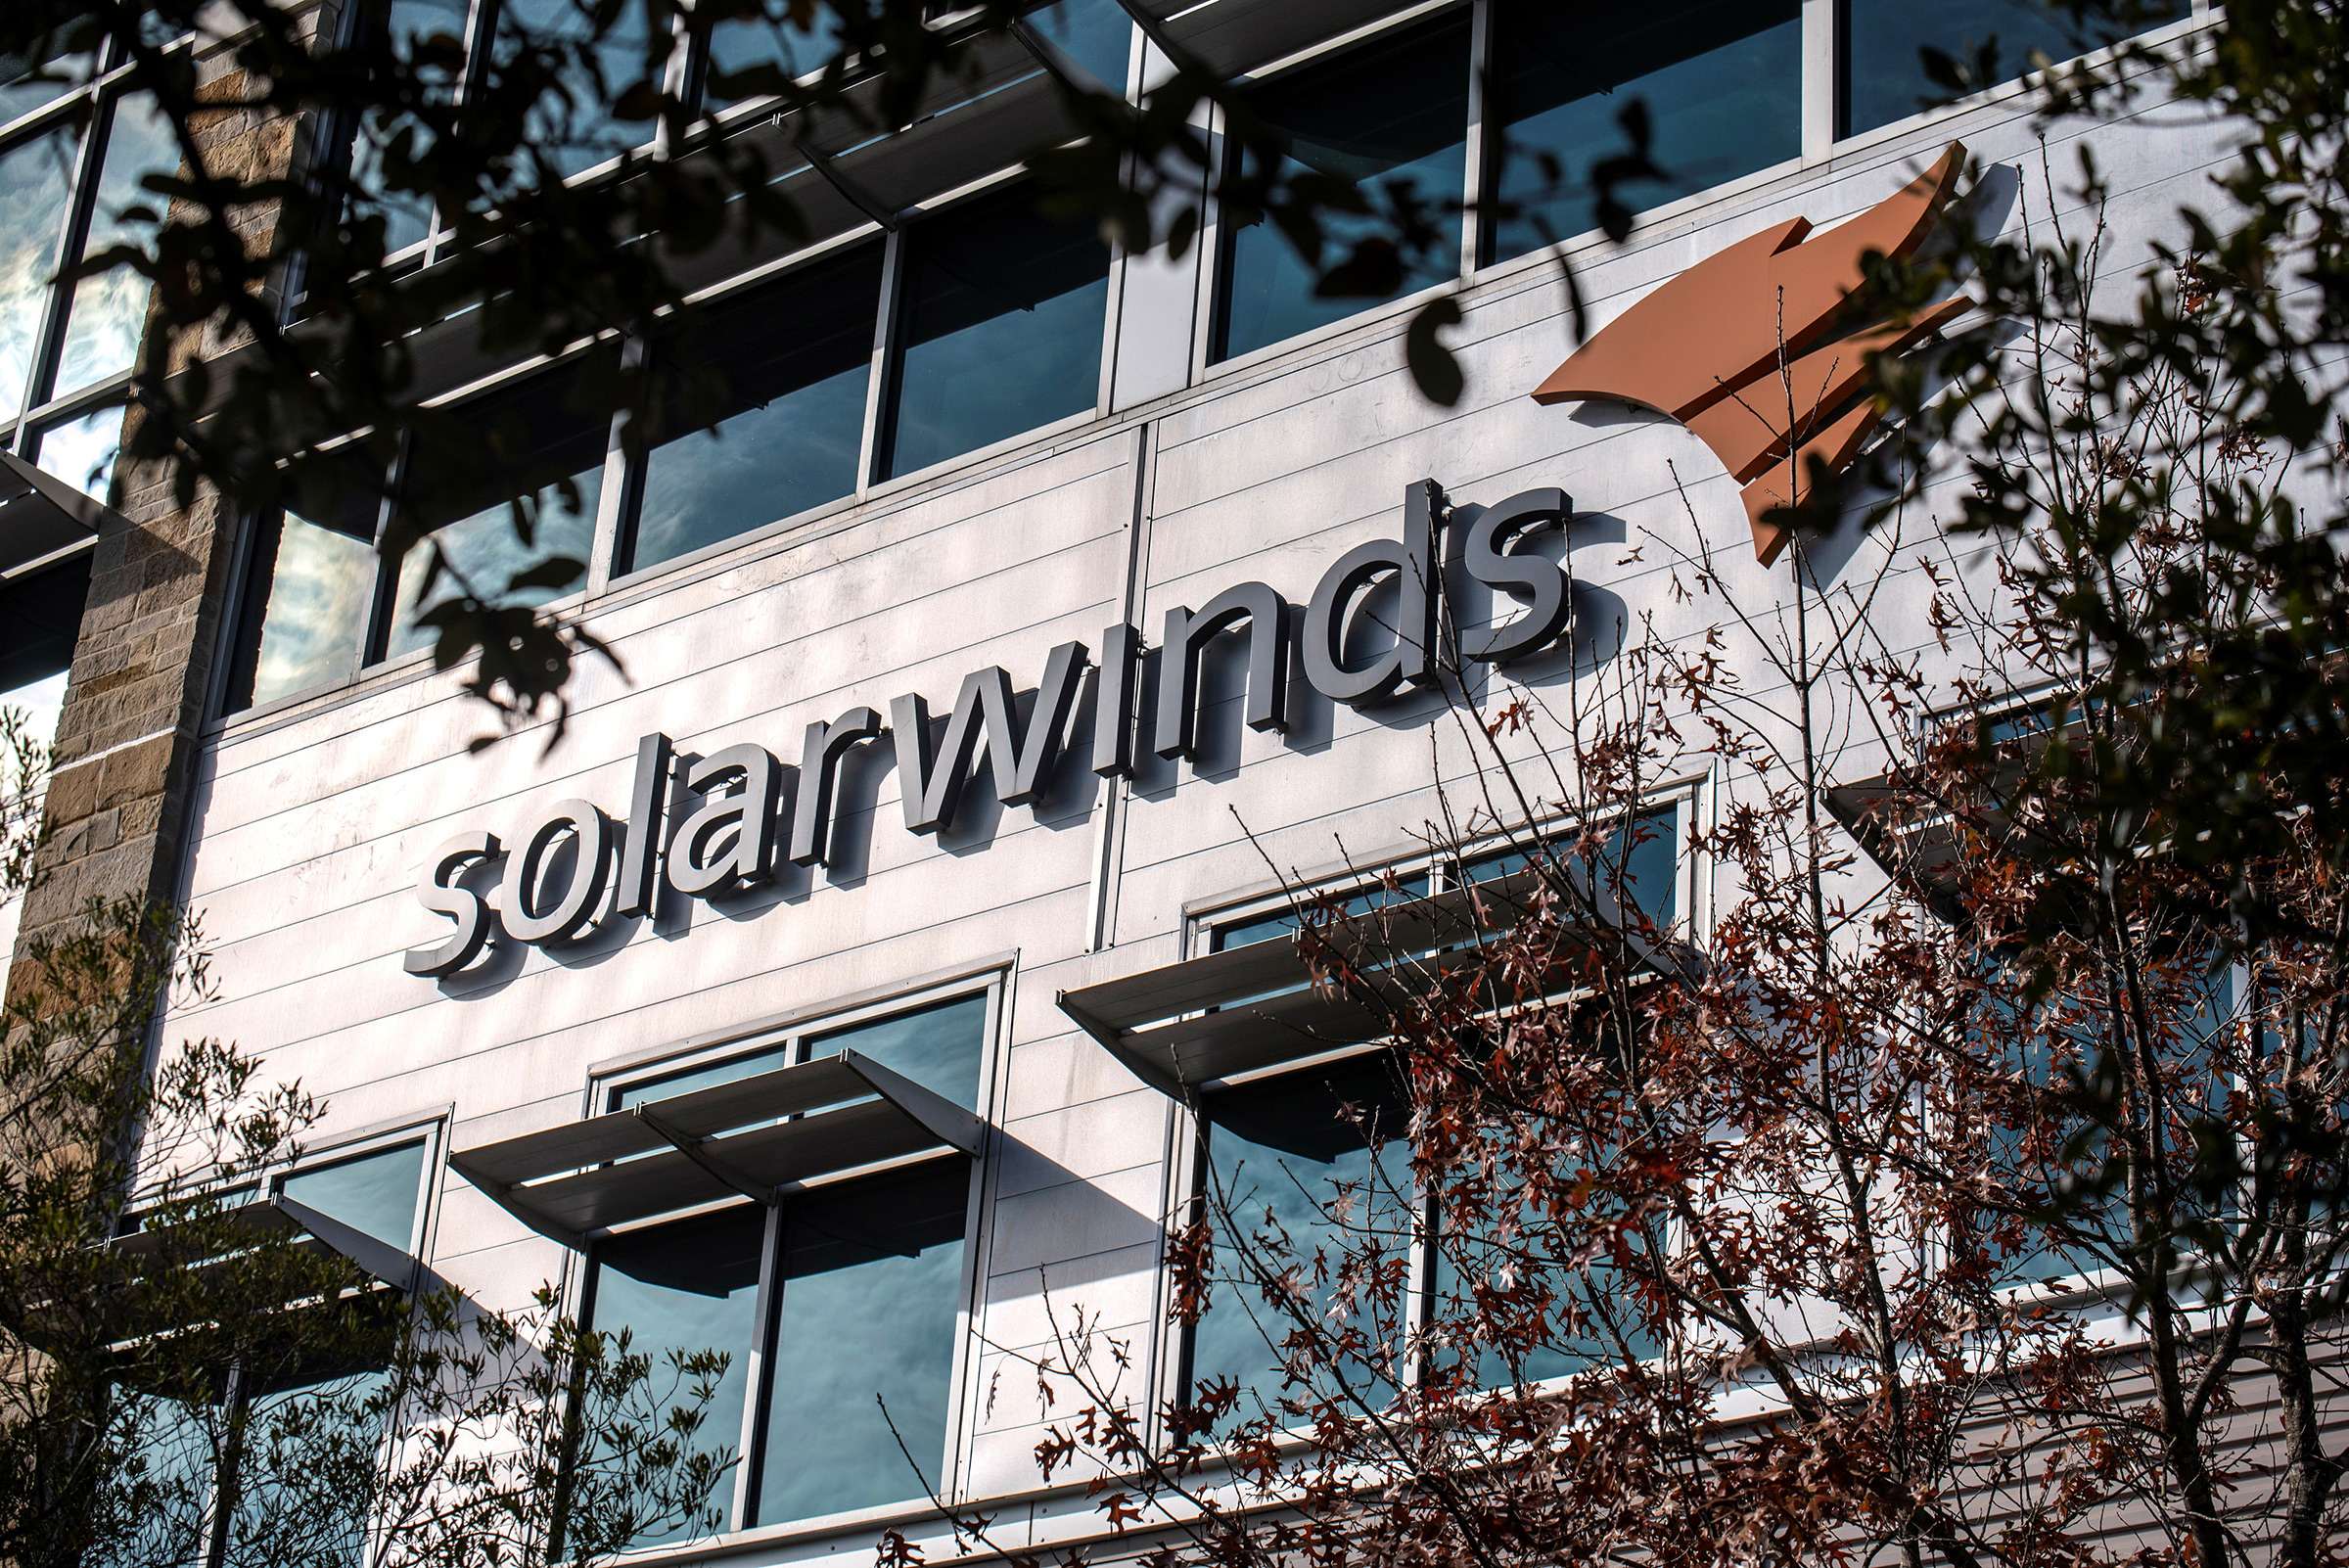 The SolarWinds logo is seen outside its headquarters in Austin, Texas, on Dec. 18